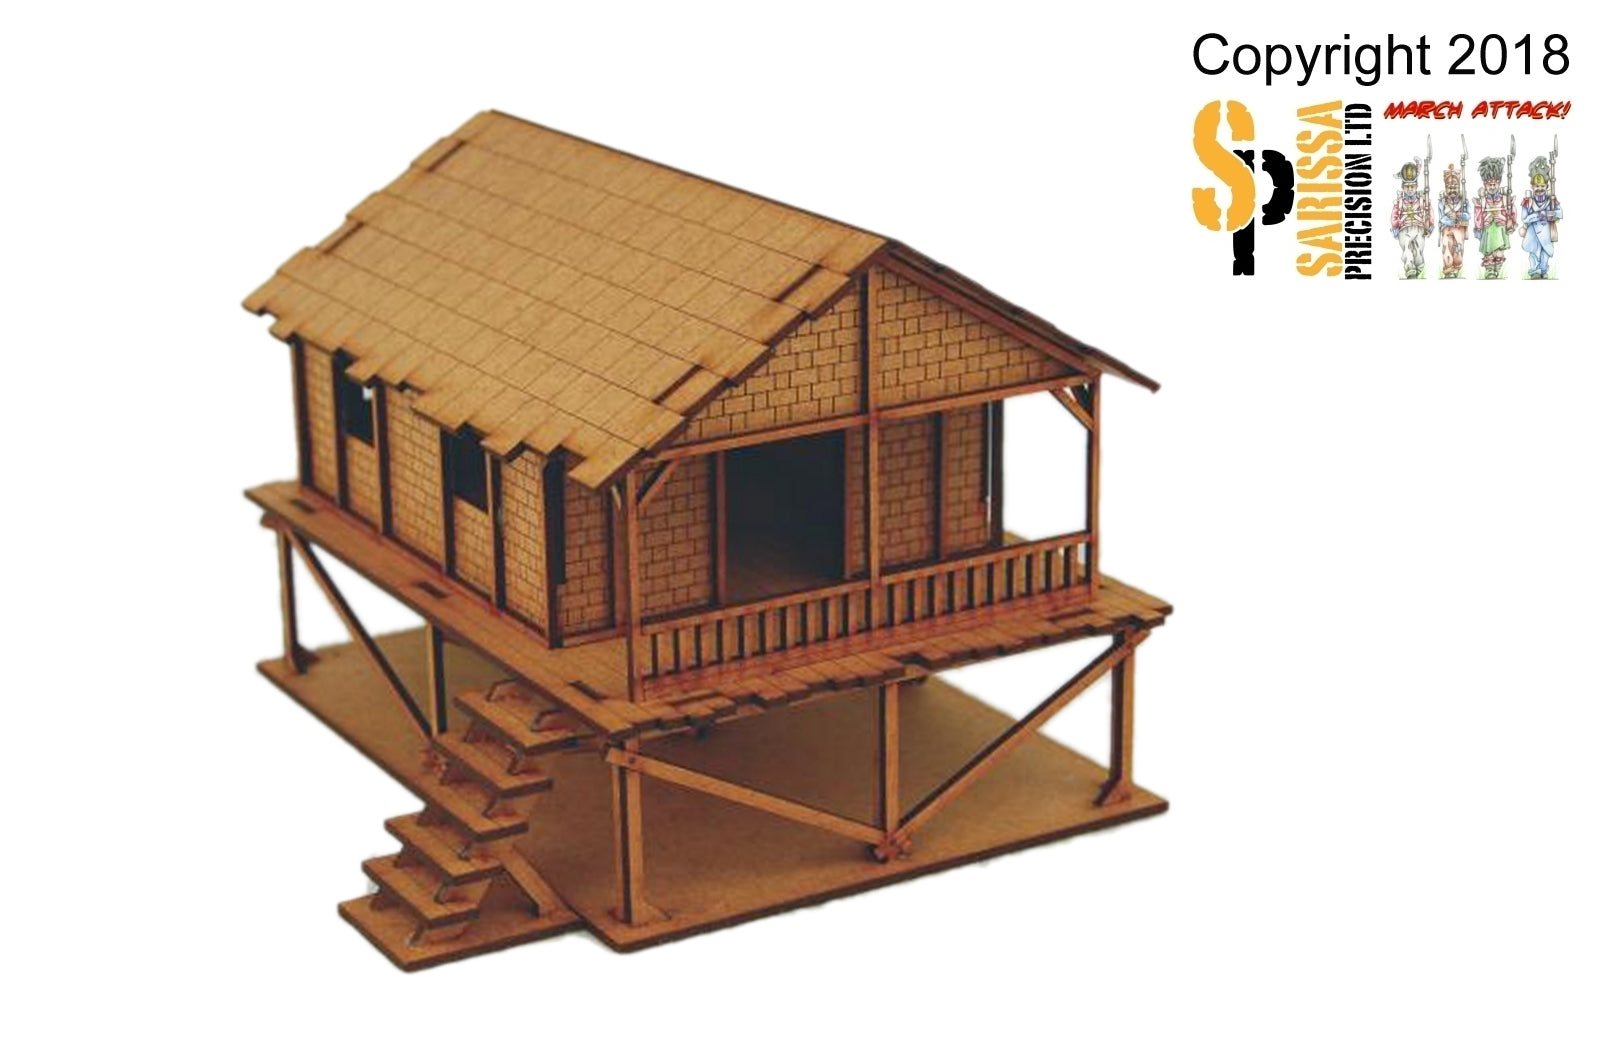 Woven Palm-Style Village House  - 20mm